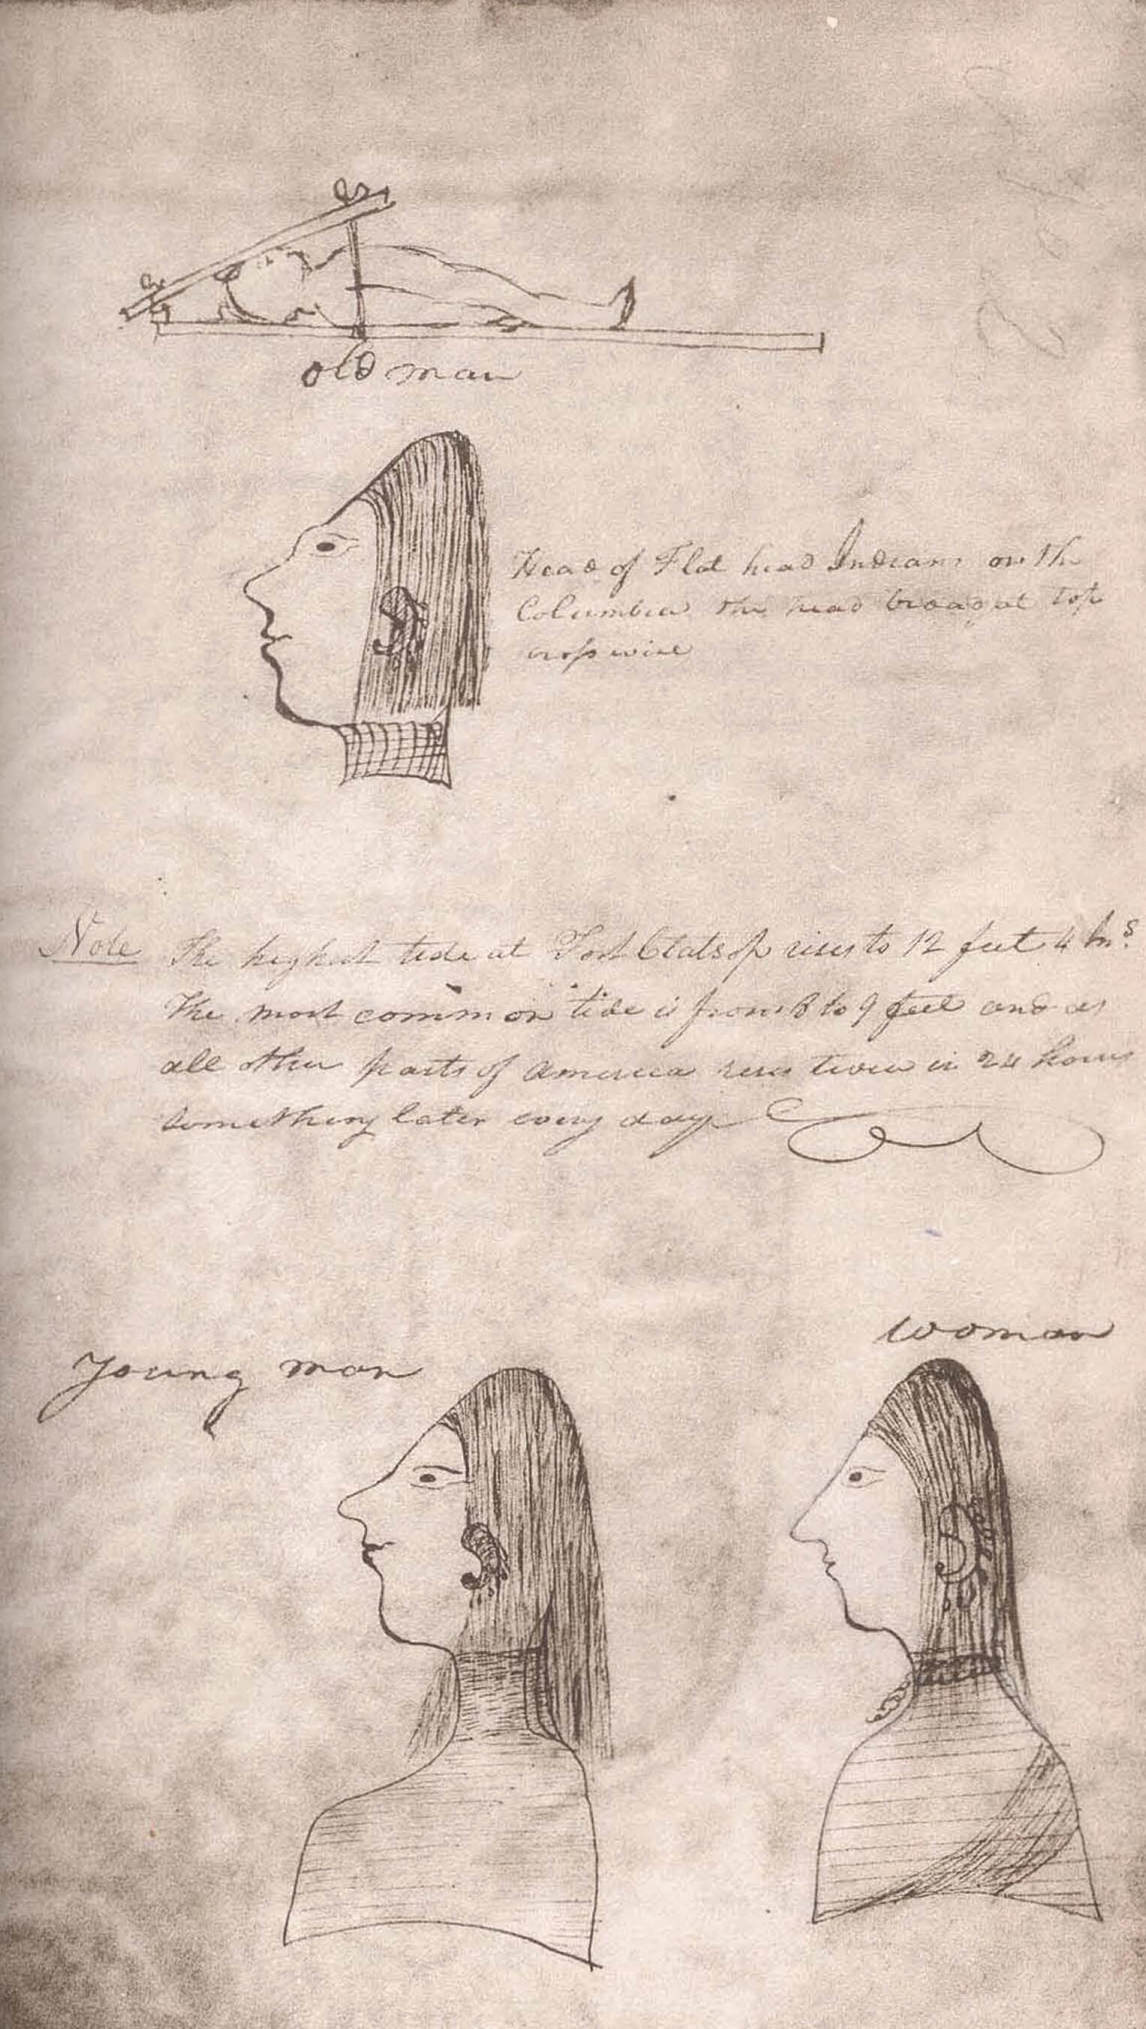 Art Canada Institute, Paul Kane, Heads of Clatsop Indians, from Original Journals of the Lewis and Clark Expedition, 1804–1806 (1905)